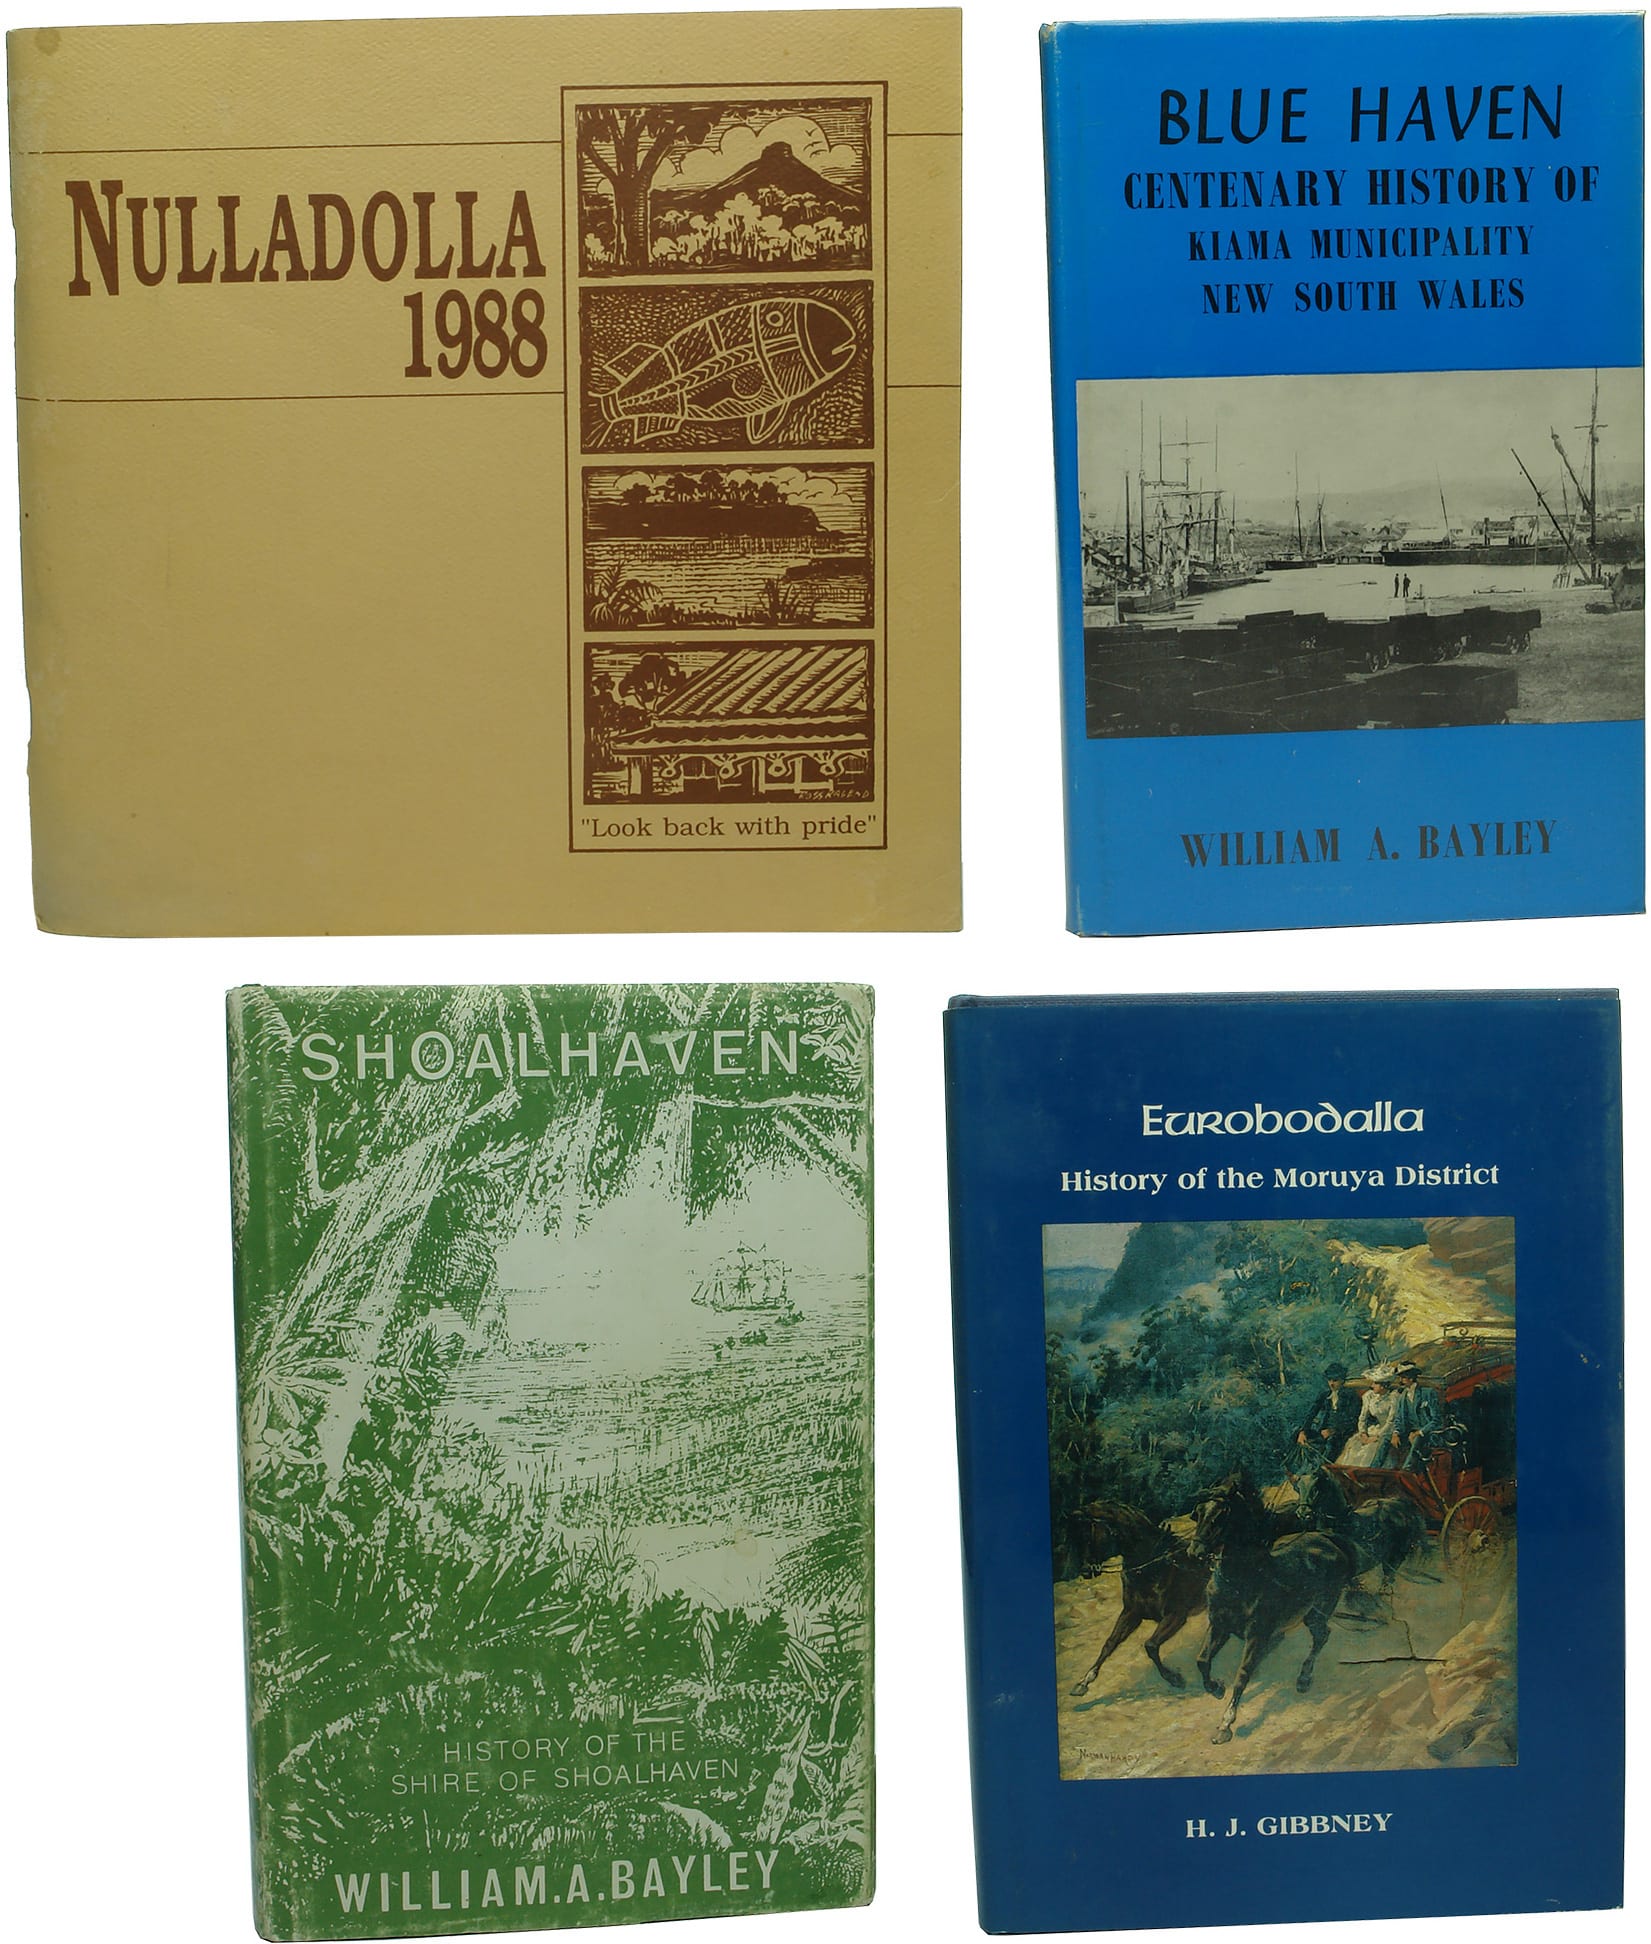 New South Wales Local History Books